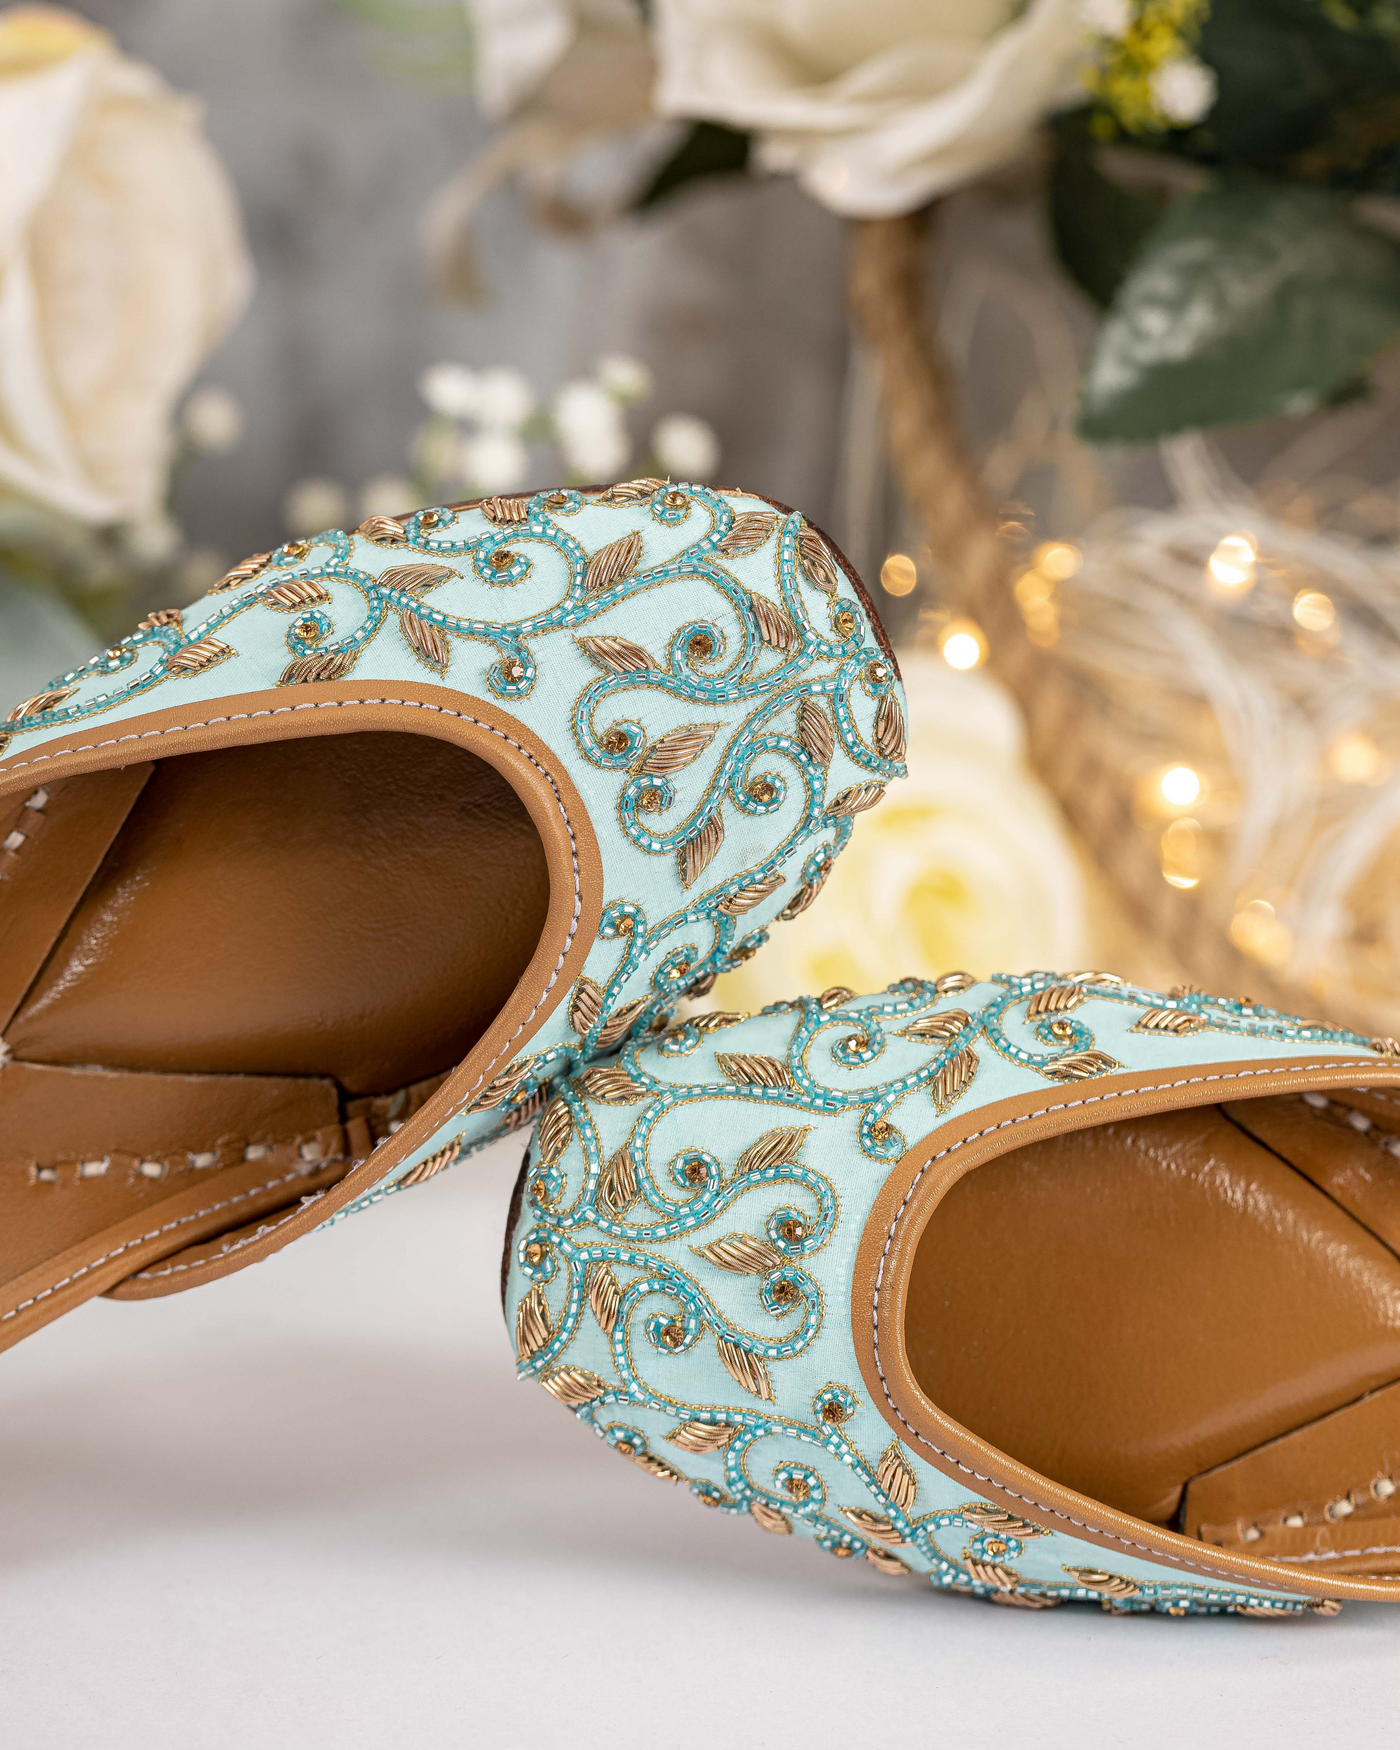 Mint Poppins Handcrafted Jutti